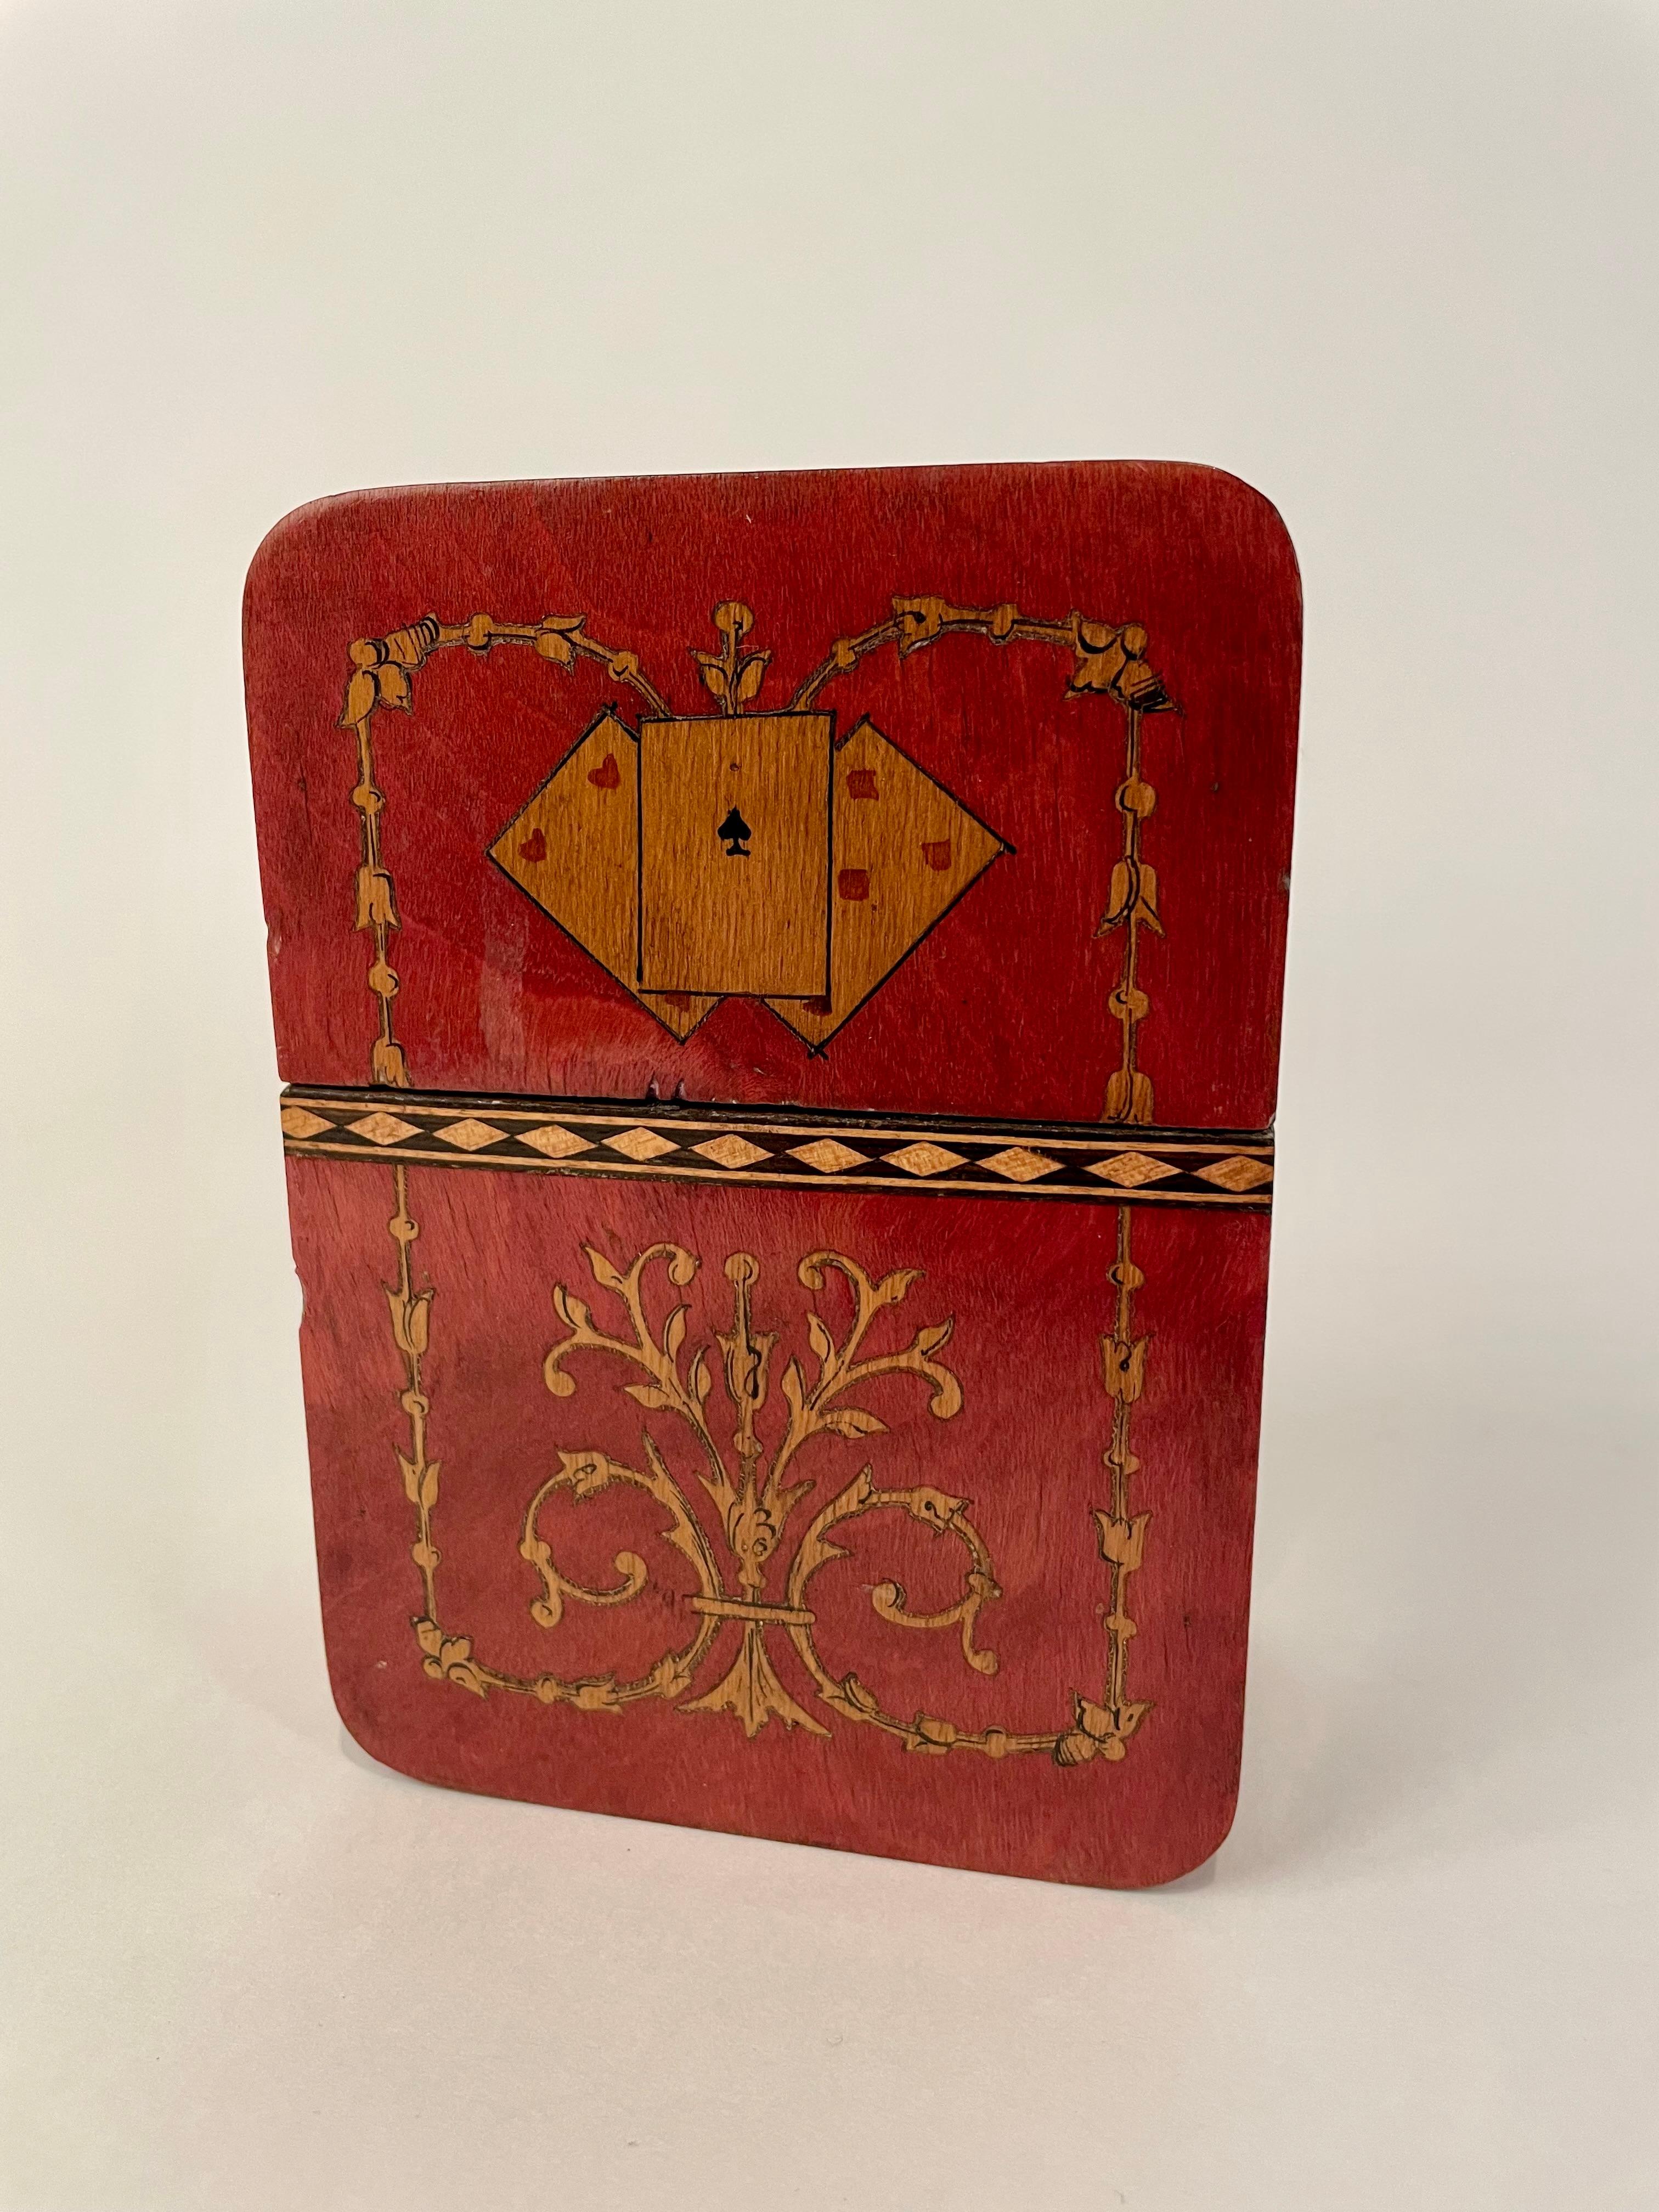 Hand-Crafted 19th Century Italian Sorrento Inlaid Mosaic Playing Card Case